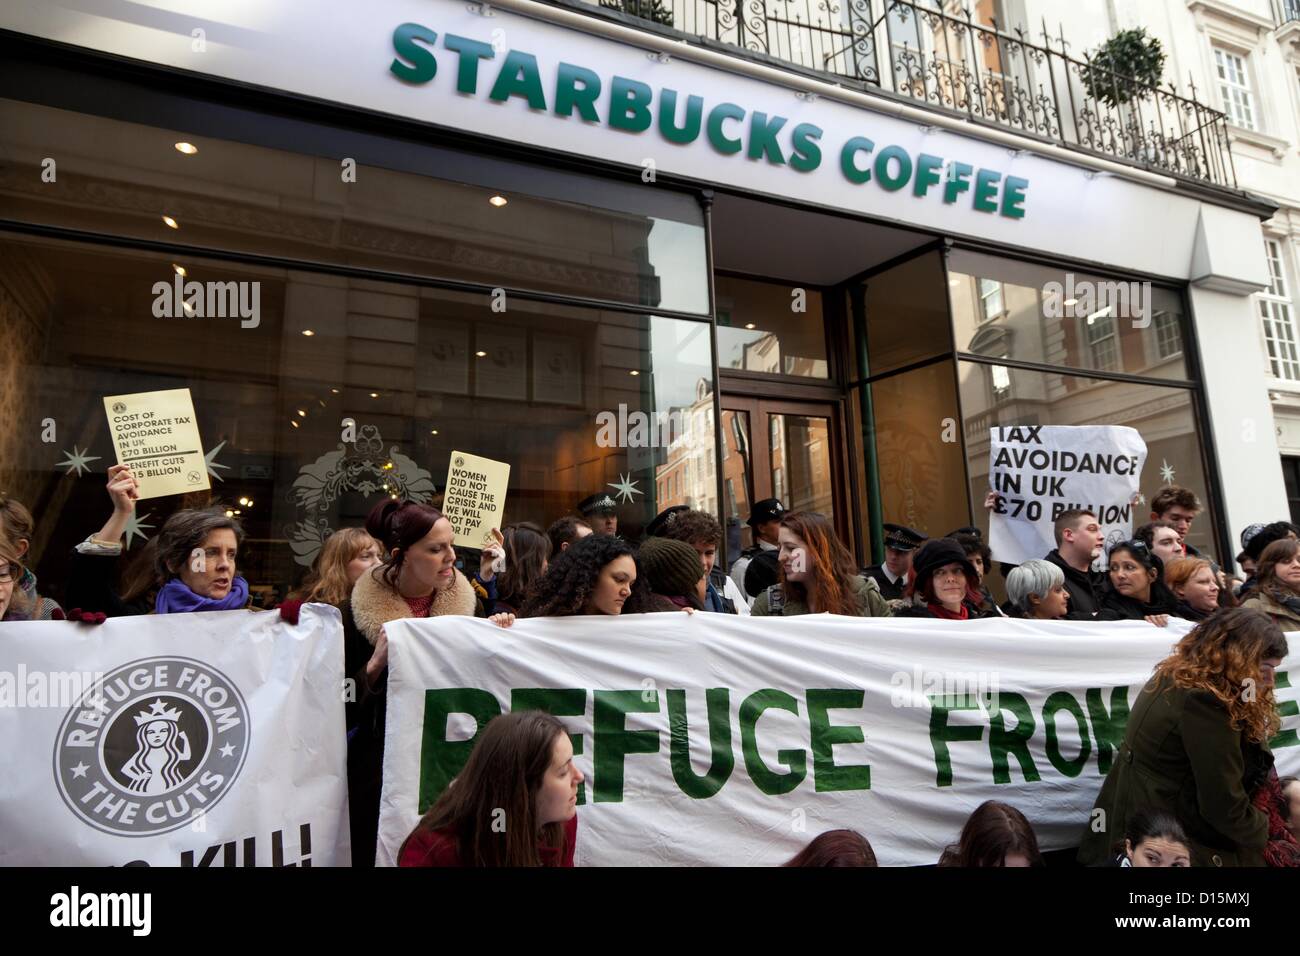 London, Uk. 8th of December 2012 Activists from the group UKuncut and supporters entered a Starbucks on Vigo Street, Mayfair, to protest against alleged tax avoidance by the large coffee chain. Protestors transformed Starbucks into a 'women's refuge' in protest against impact of government’s cuts on women. Stock Photo